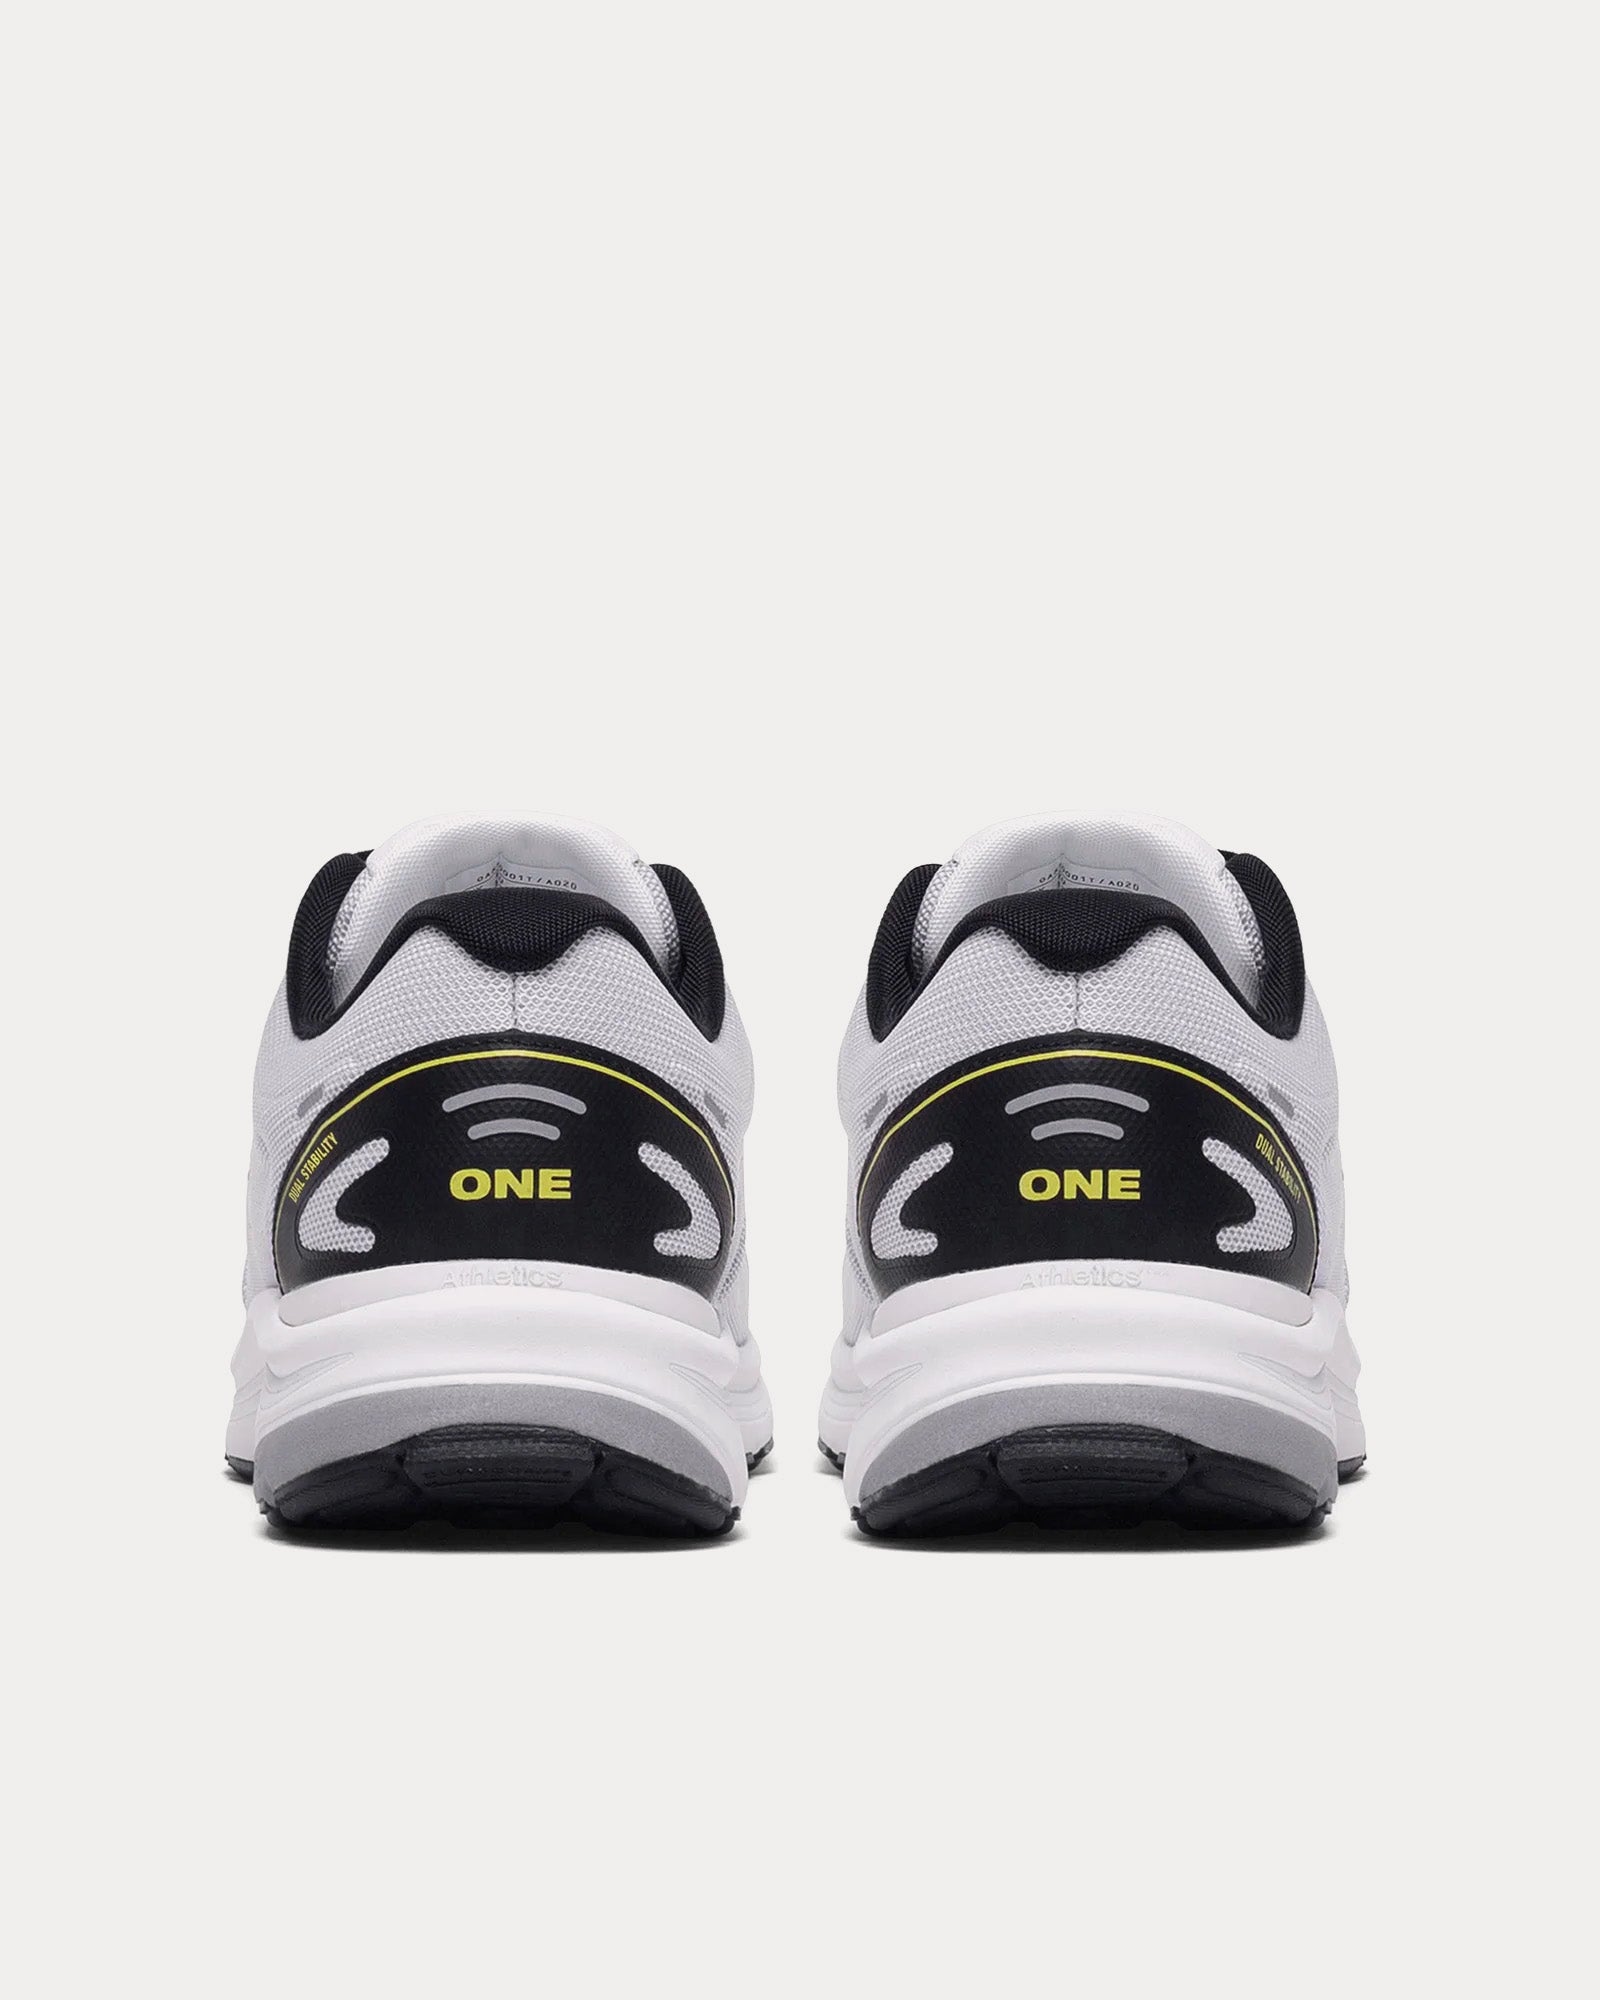 Athletics FTWR - One Remastered Silver / Black Low Top Sneakers